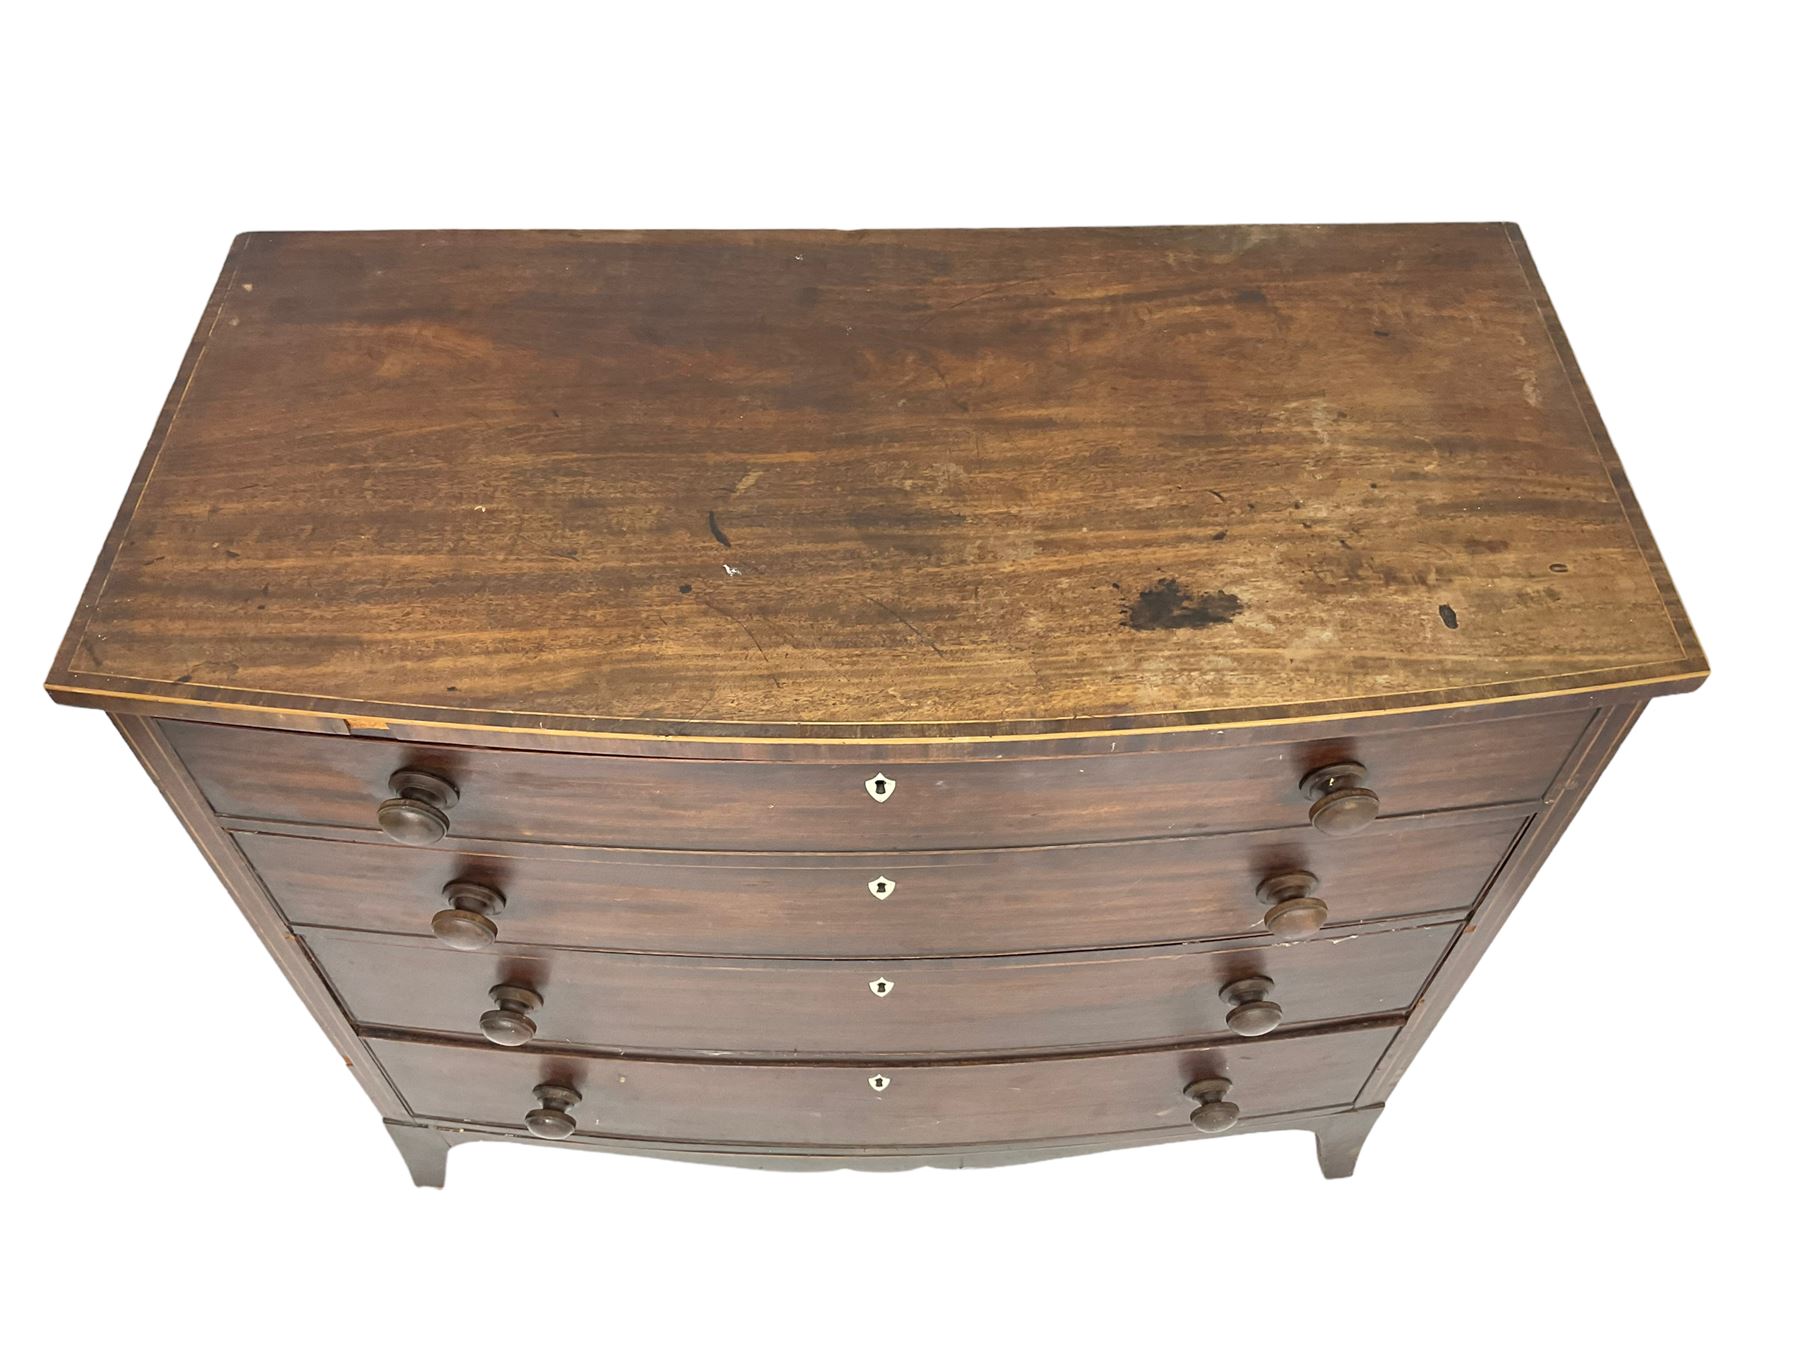 George III mahogany bow-front chest - Image 6 of 10